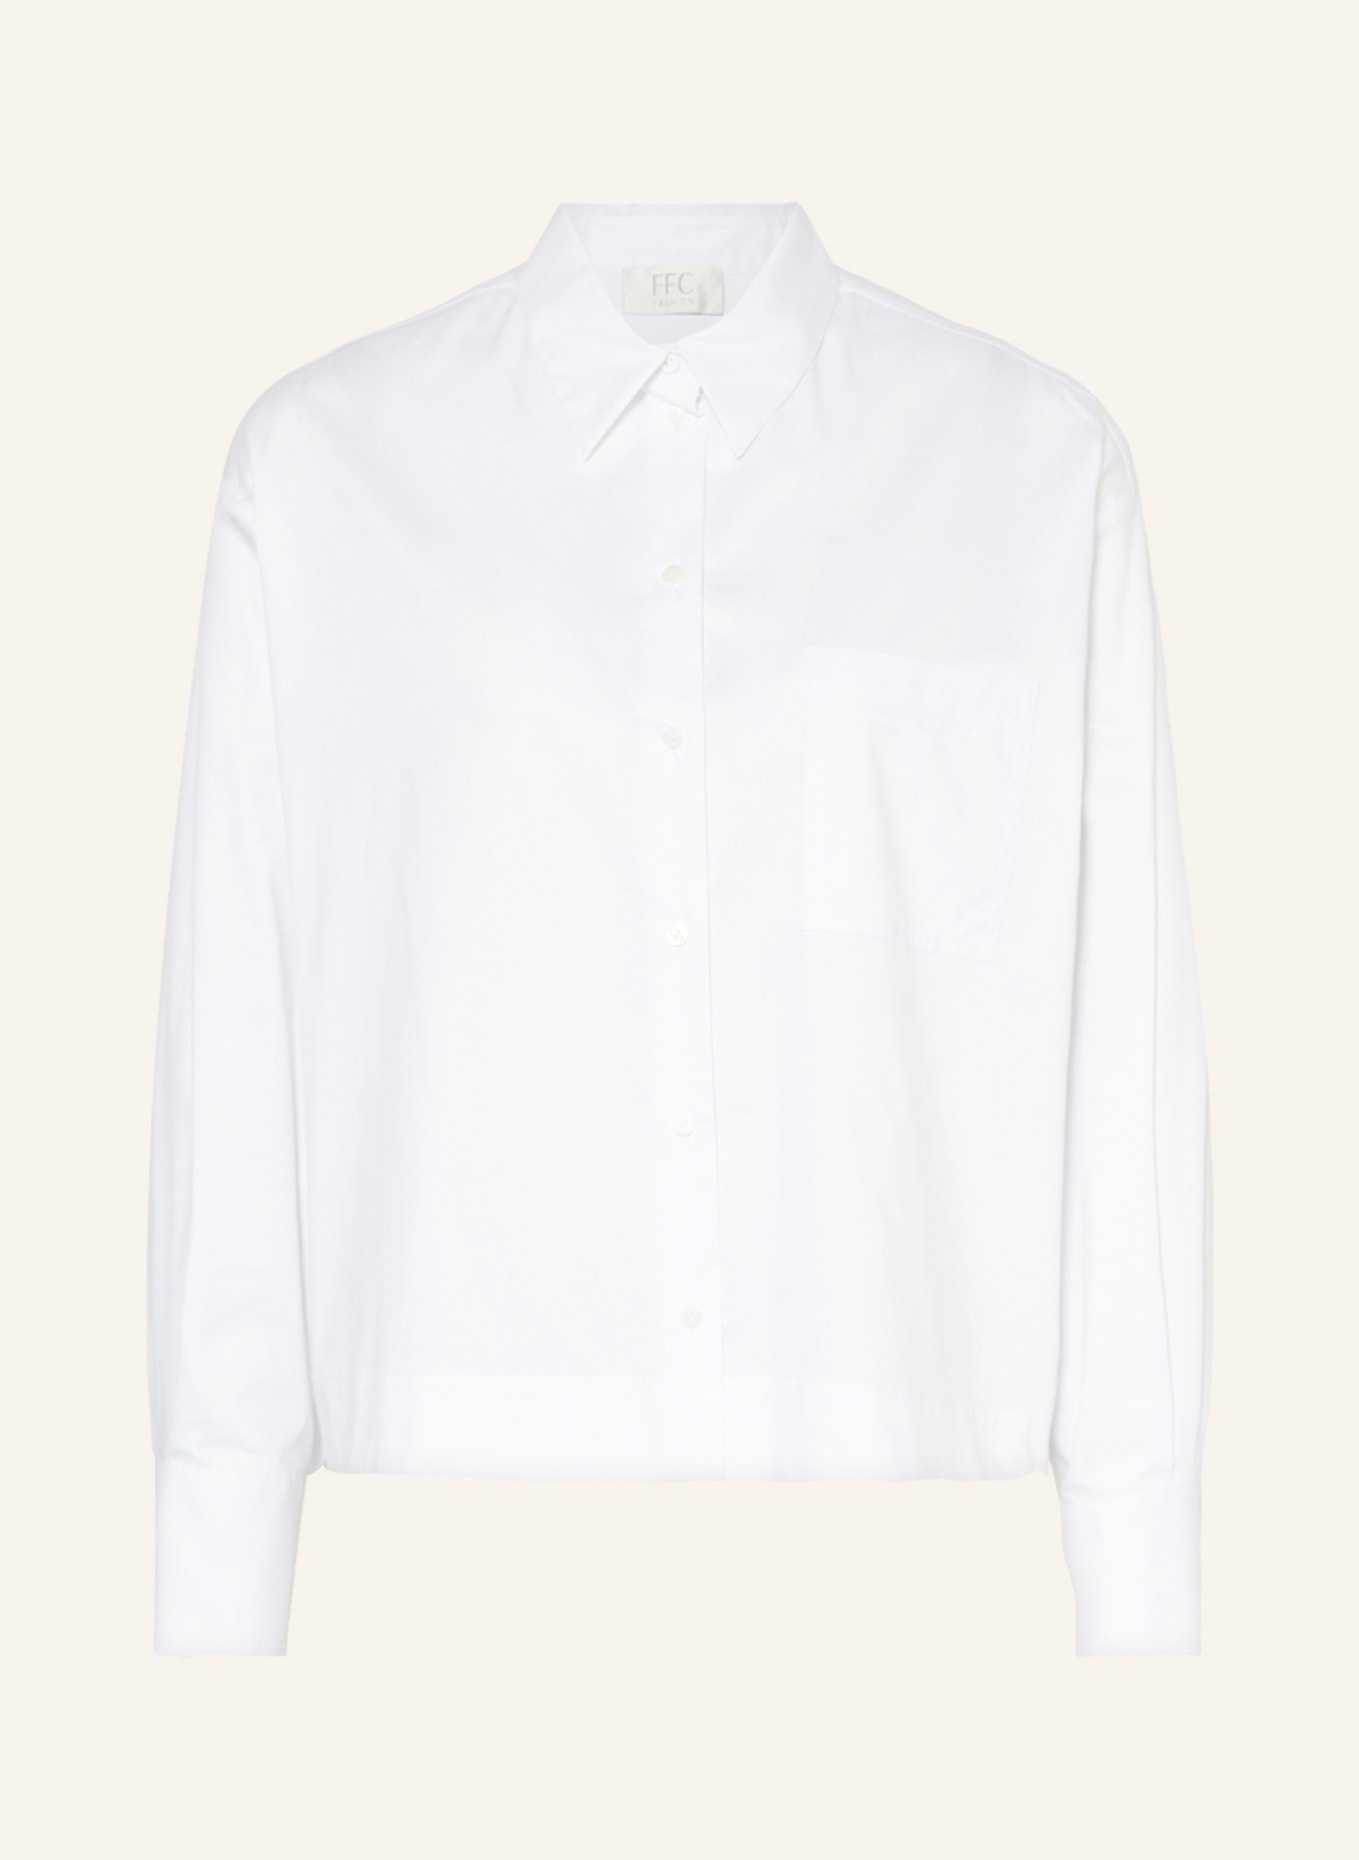 FFC Shirt blouse, Color: WHITE (Image 1)